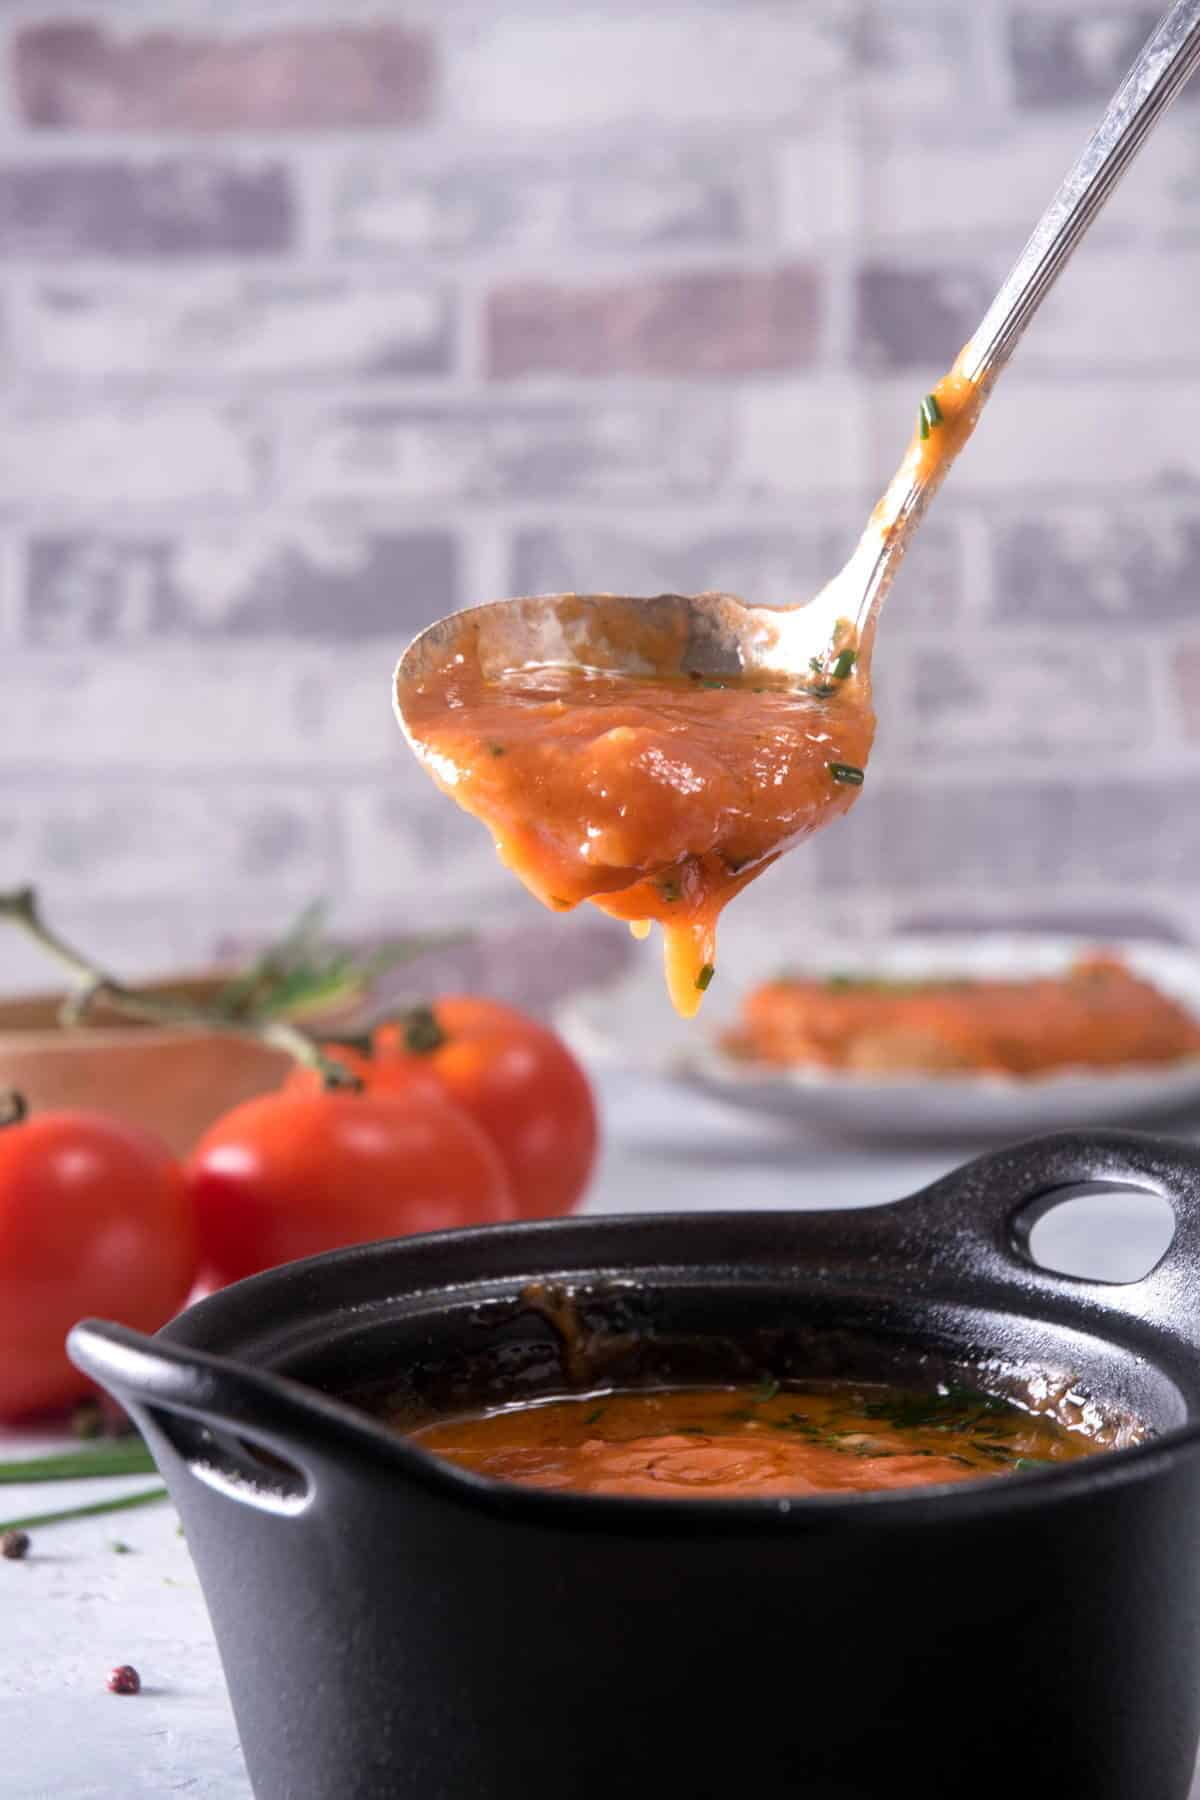 Tomato gravy in a small cast iron bowl and a soup spoon.